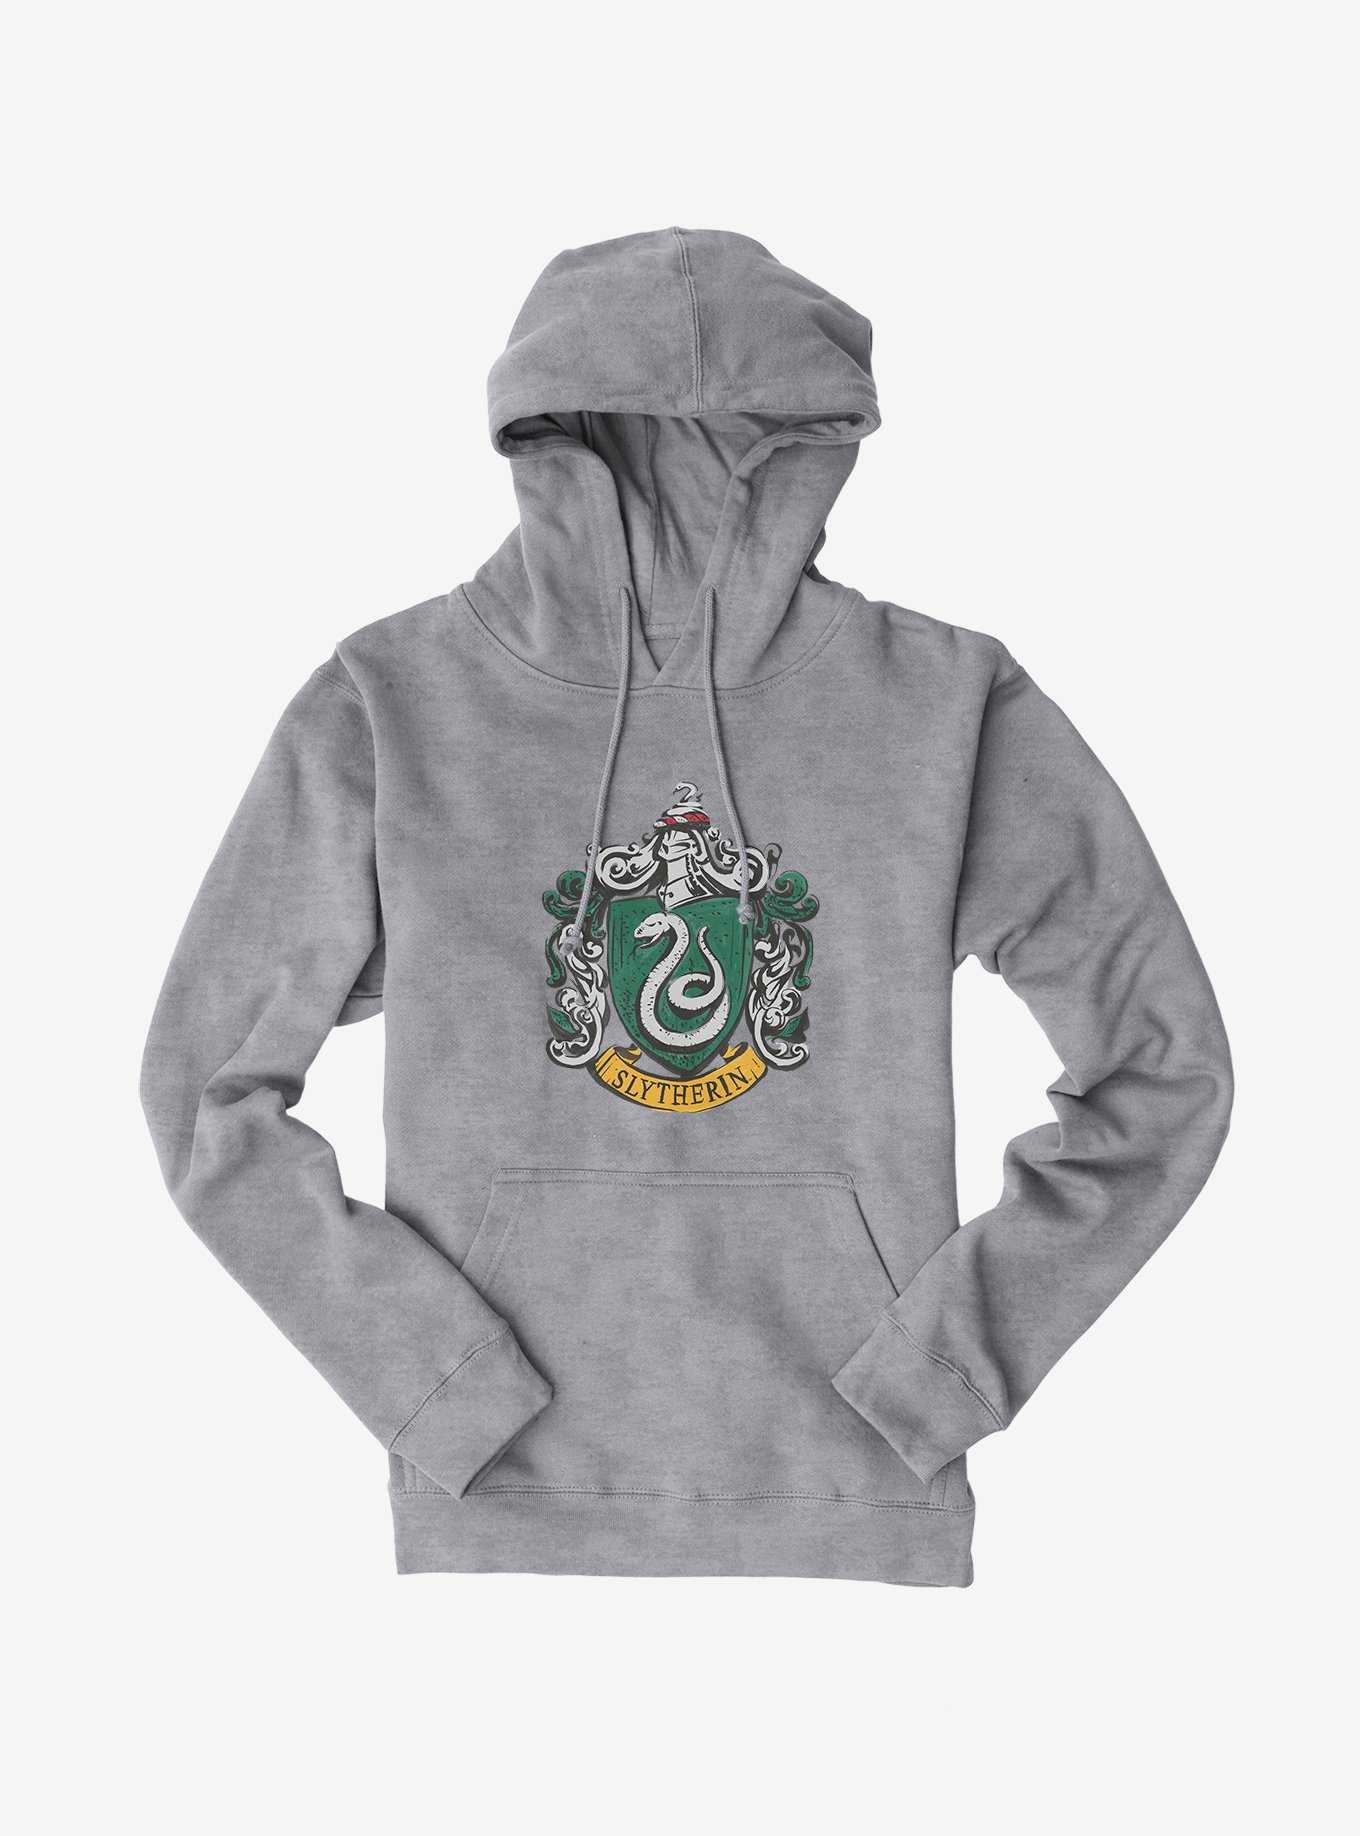 & Topic Potter Sweaters Harry Hot | OFFICIAL Hoodies